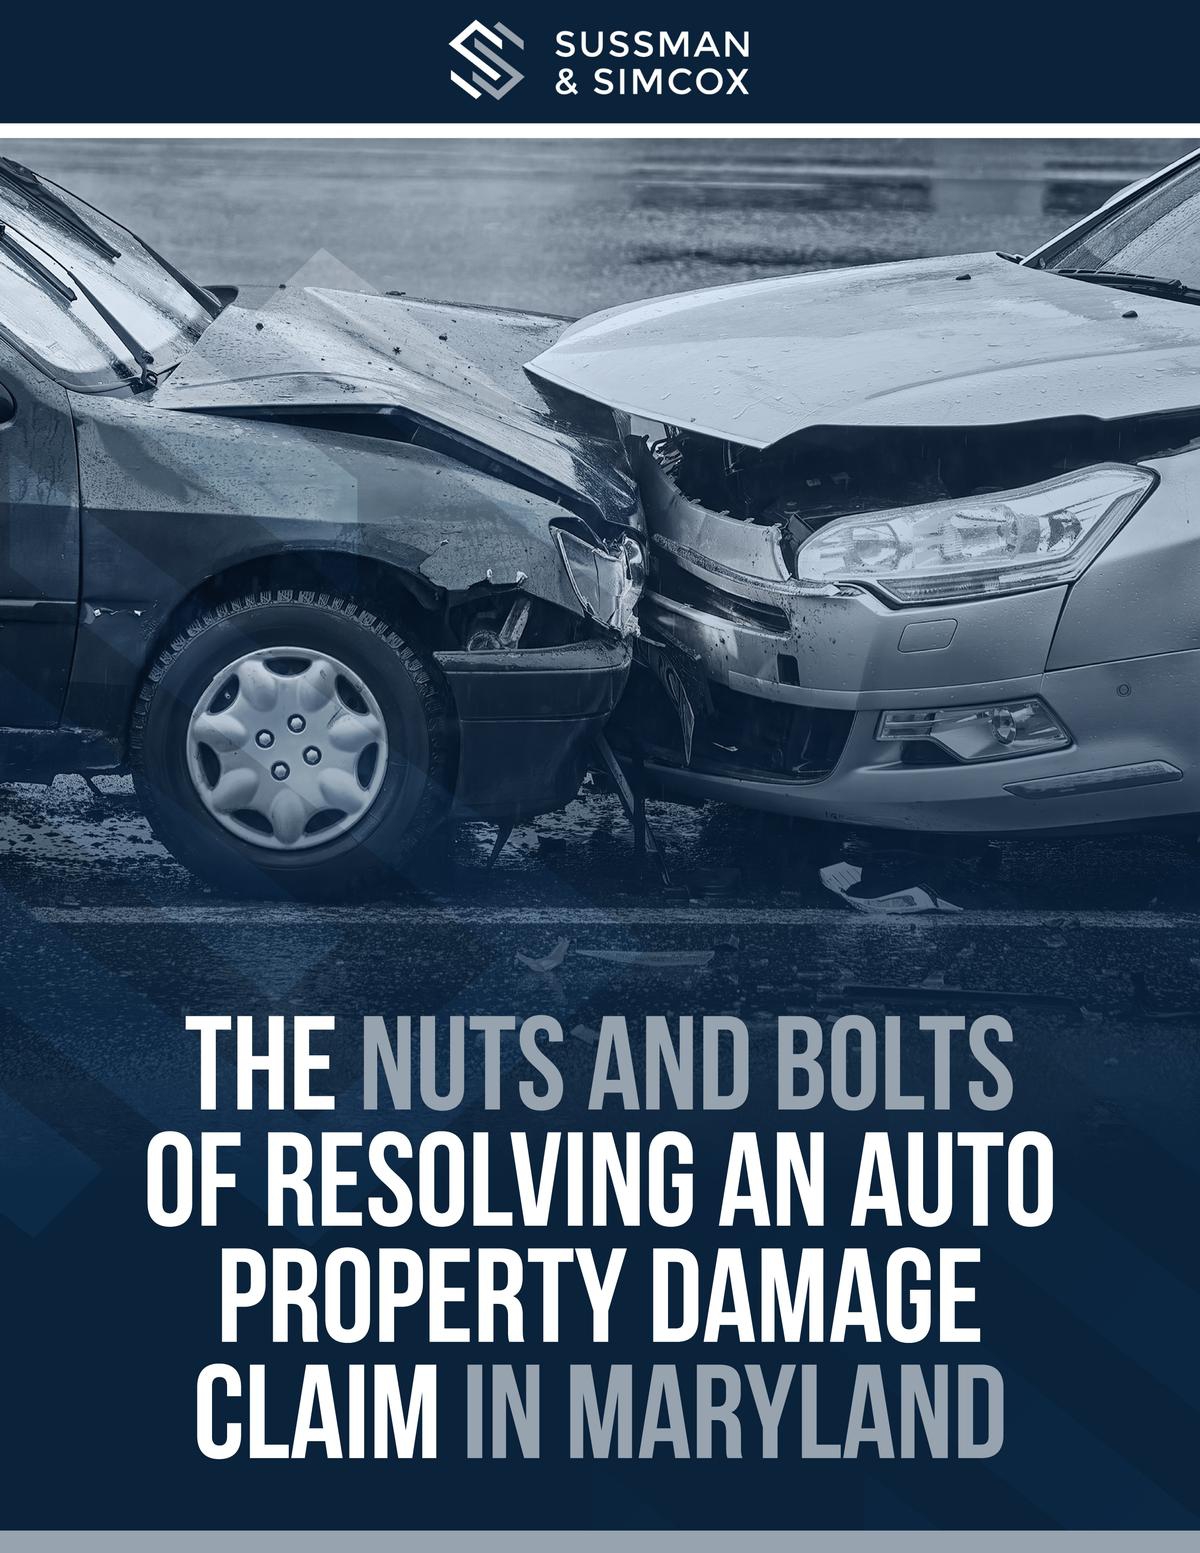 The Nuts And Bolts of Resolving an Auto Property Damage Claim in Maryland